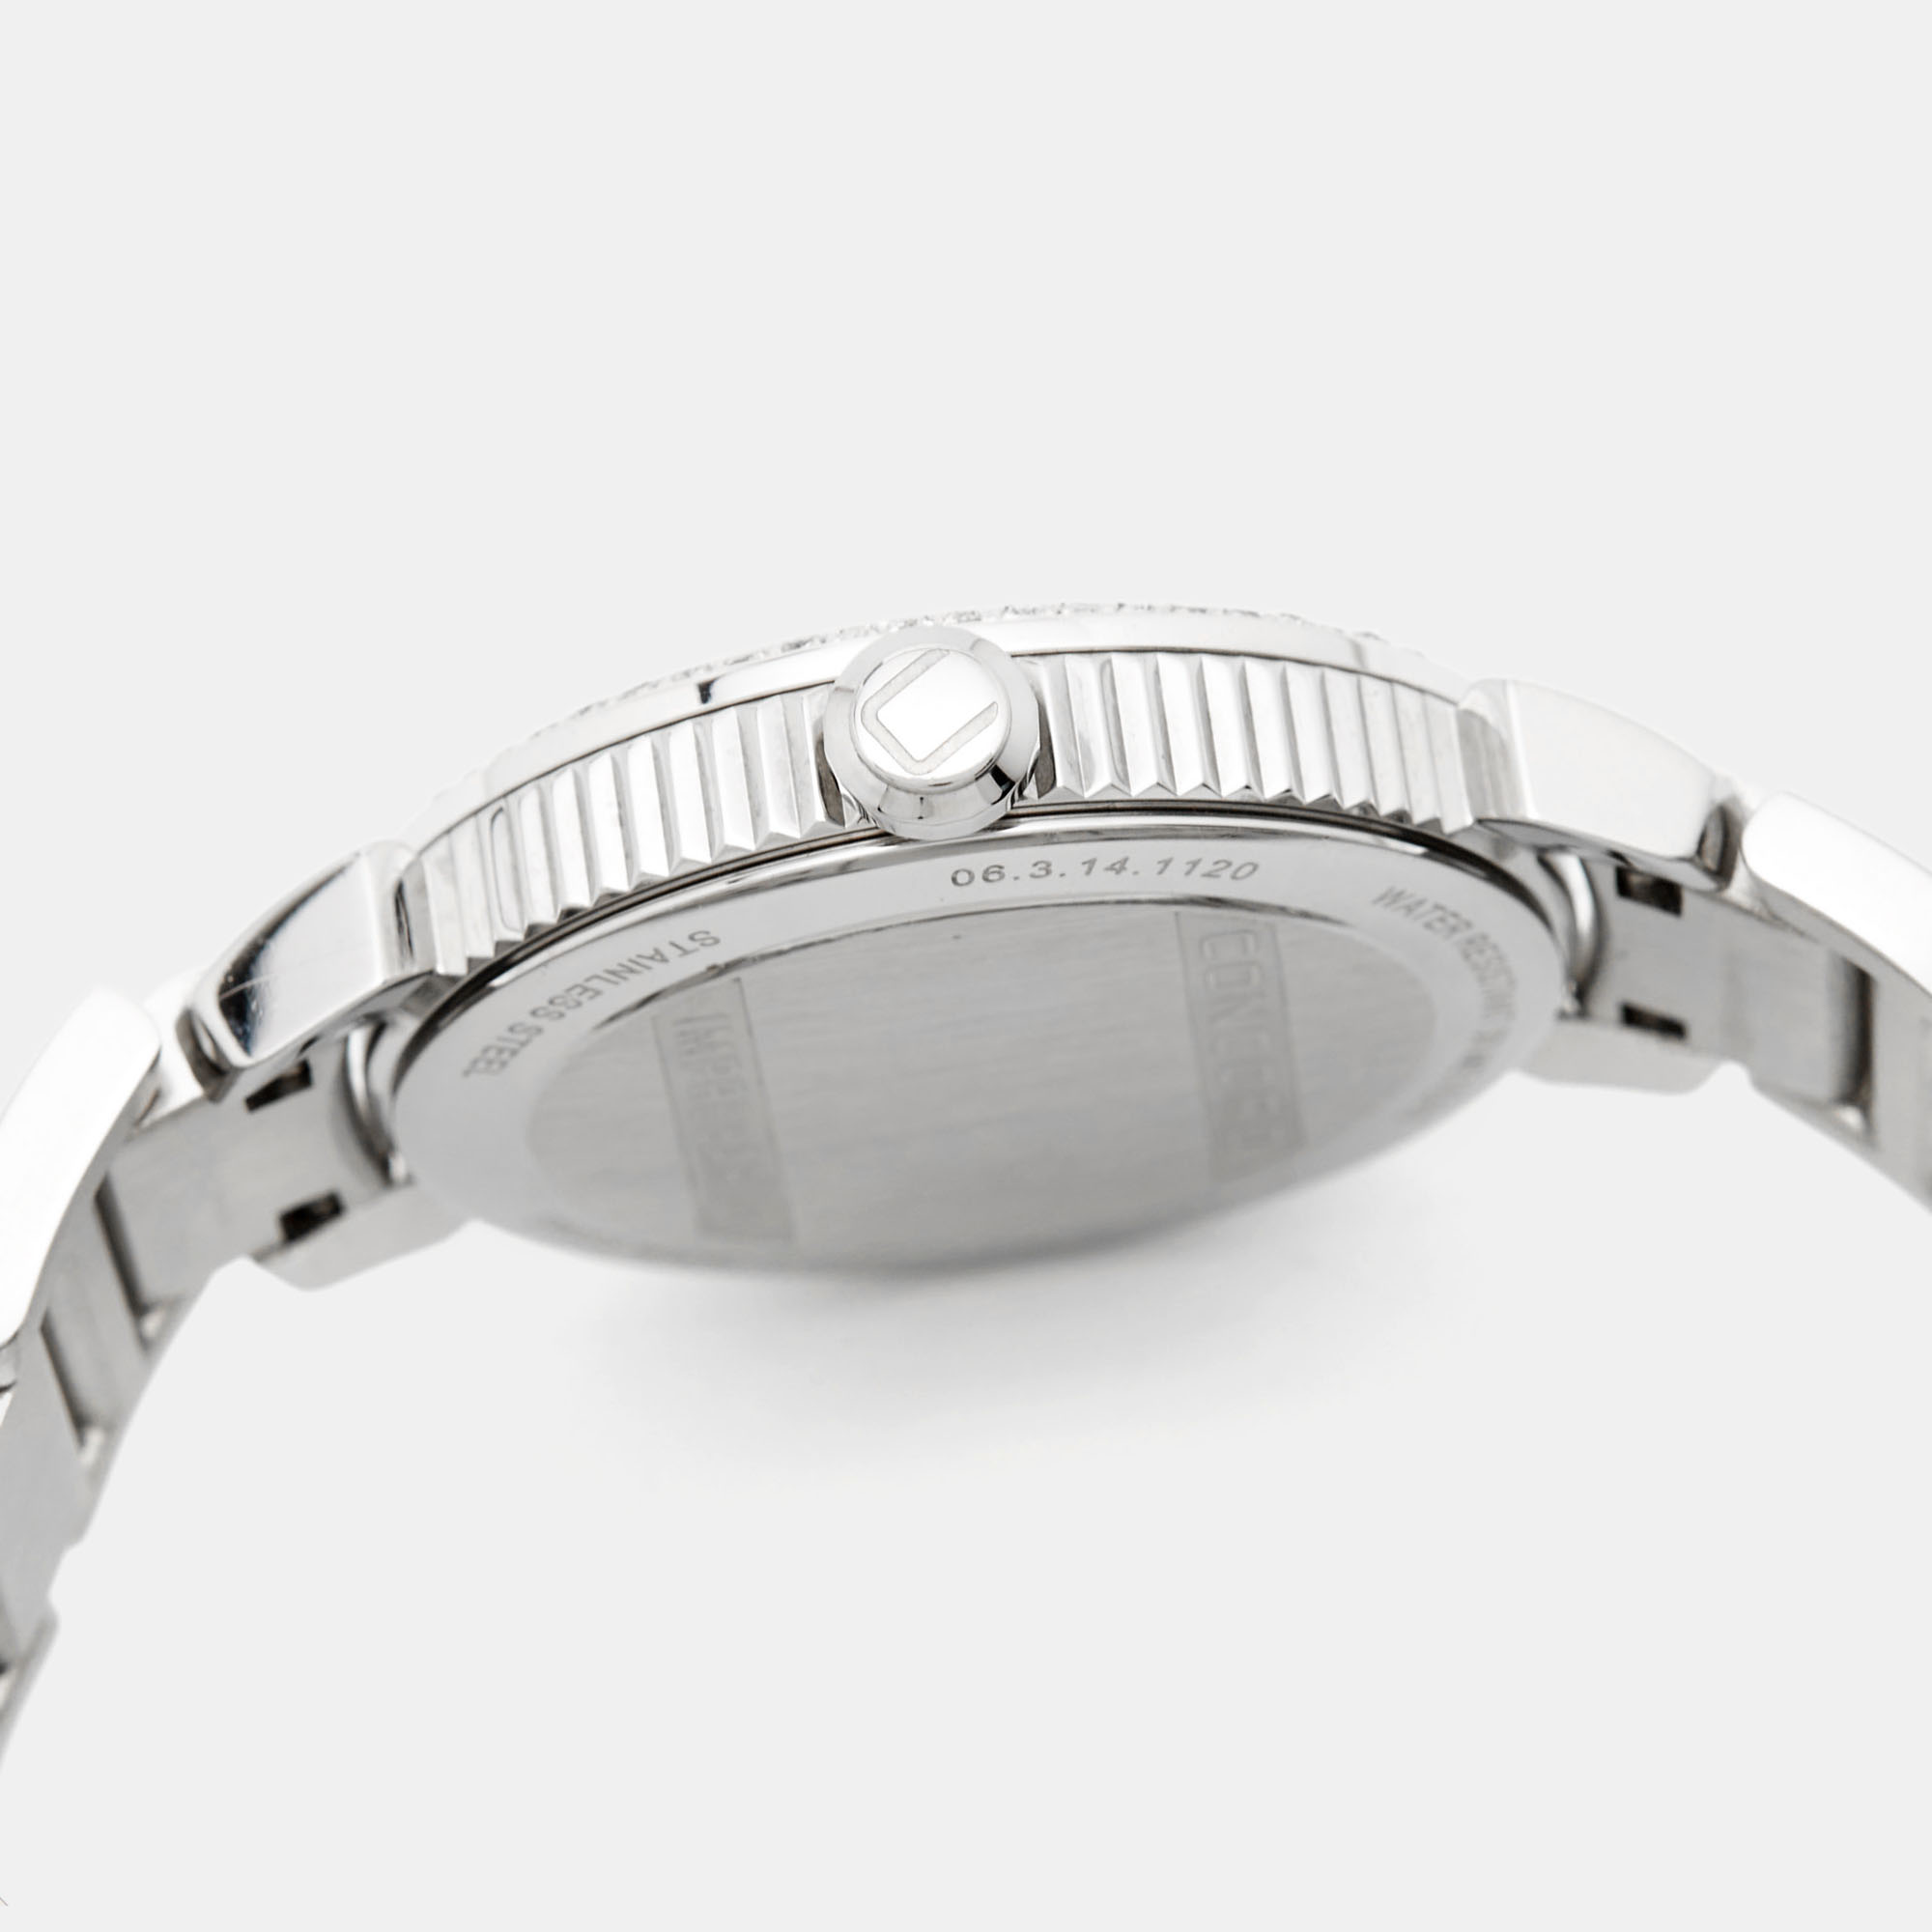 Concord Mother Of Pearl Stainless Steel Diamond Impresario CC.06.3.14.1120S Women's Wristwatch 32 Mm